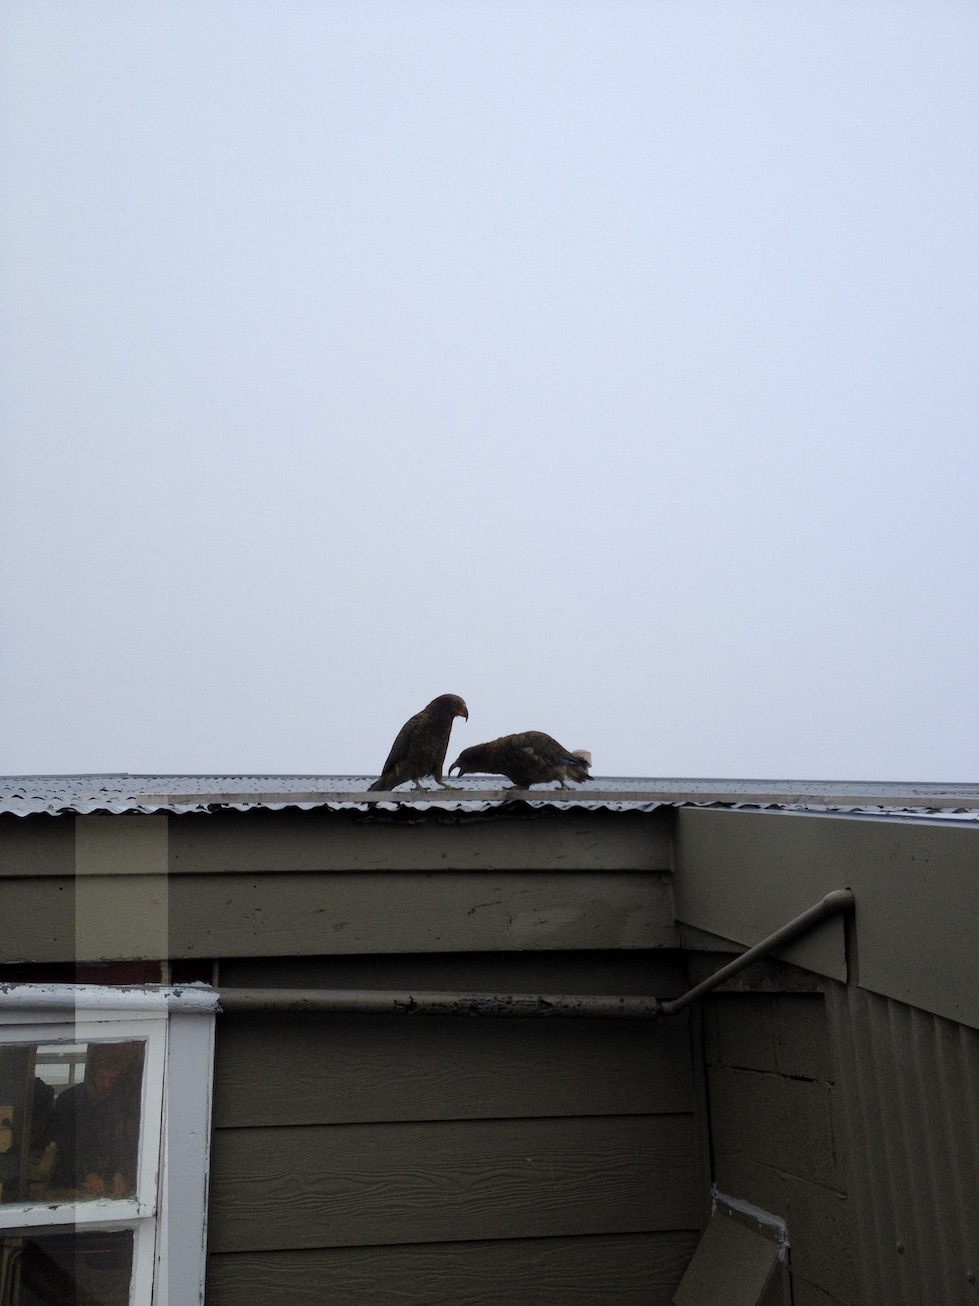 Two Kea preen each other on top of the kitchen roof